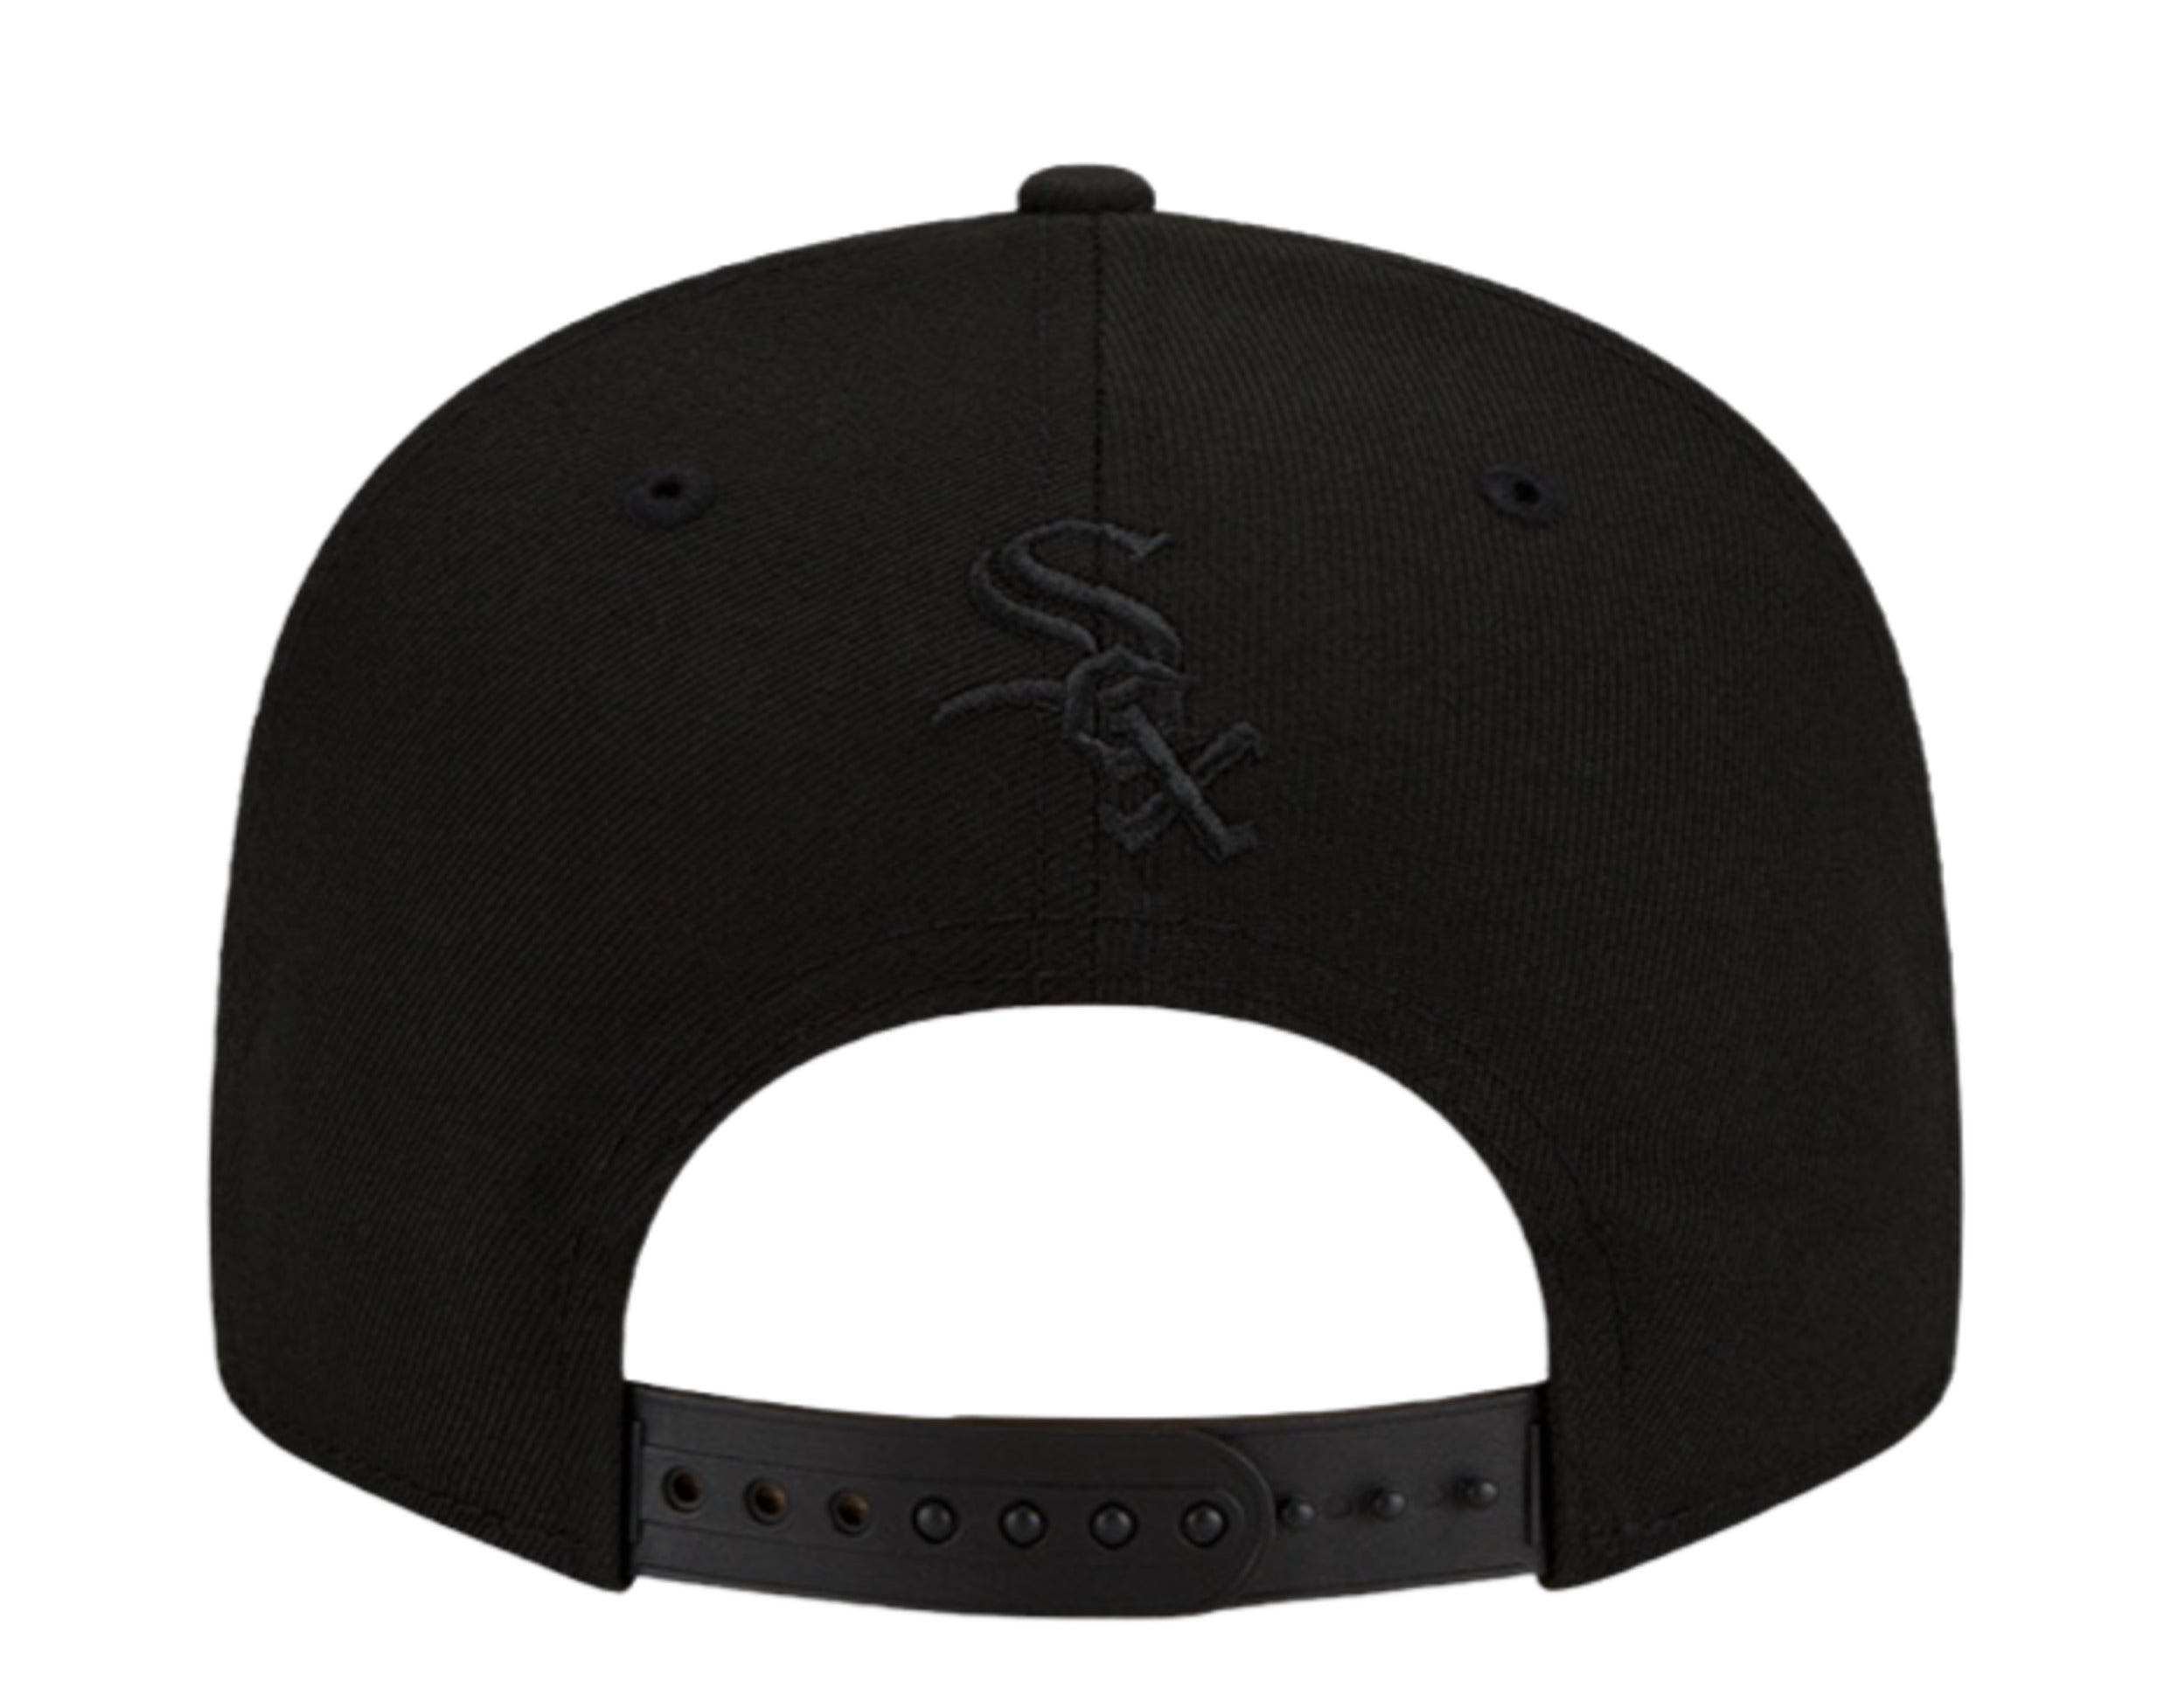  Mitchell & Ness Chicago White Sox Cooperstown MLB Evergreen  Snapback Hat Cap - Black : Sports & Outdoors